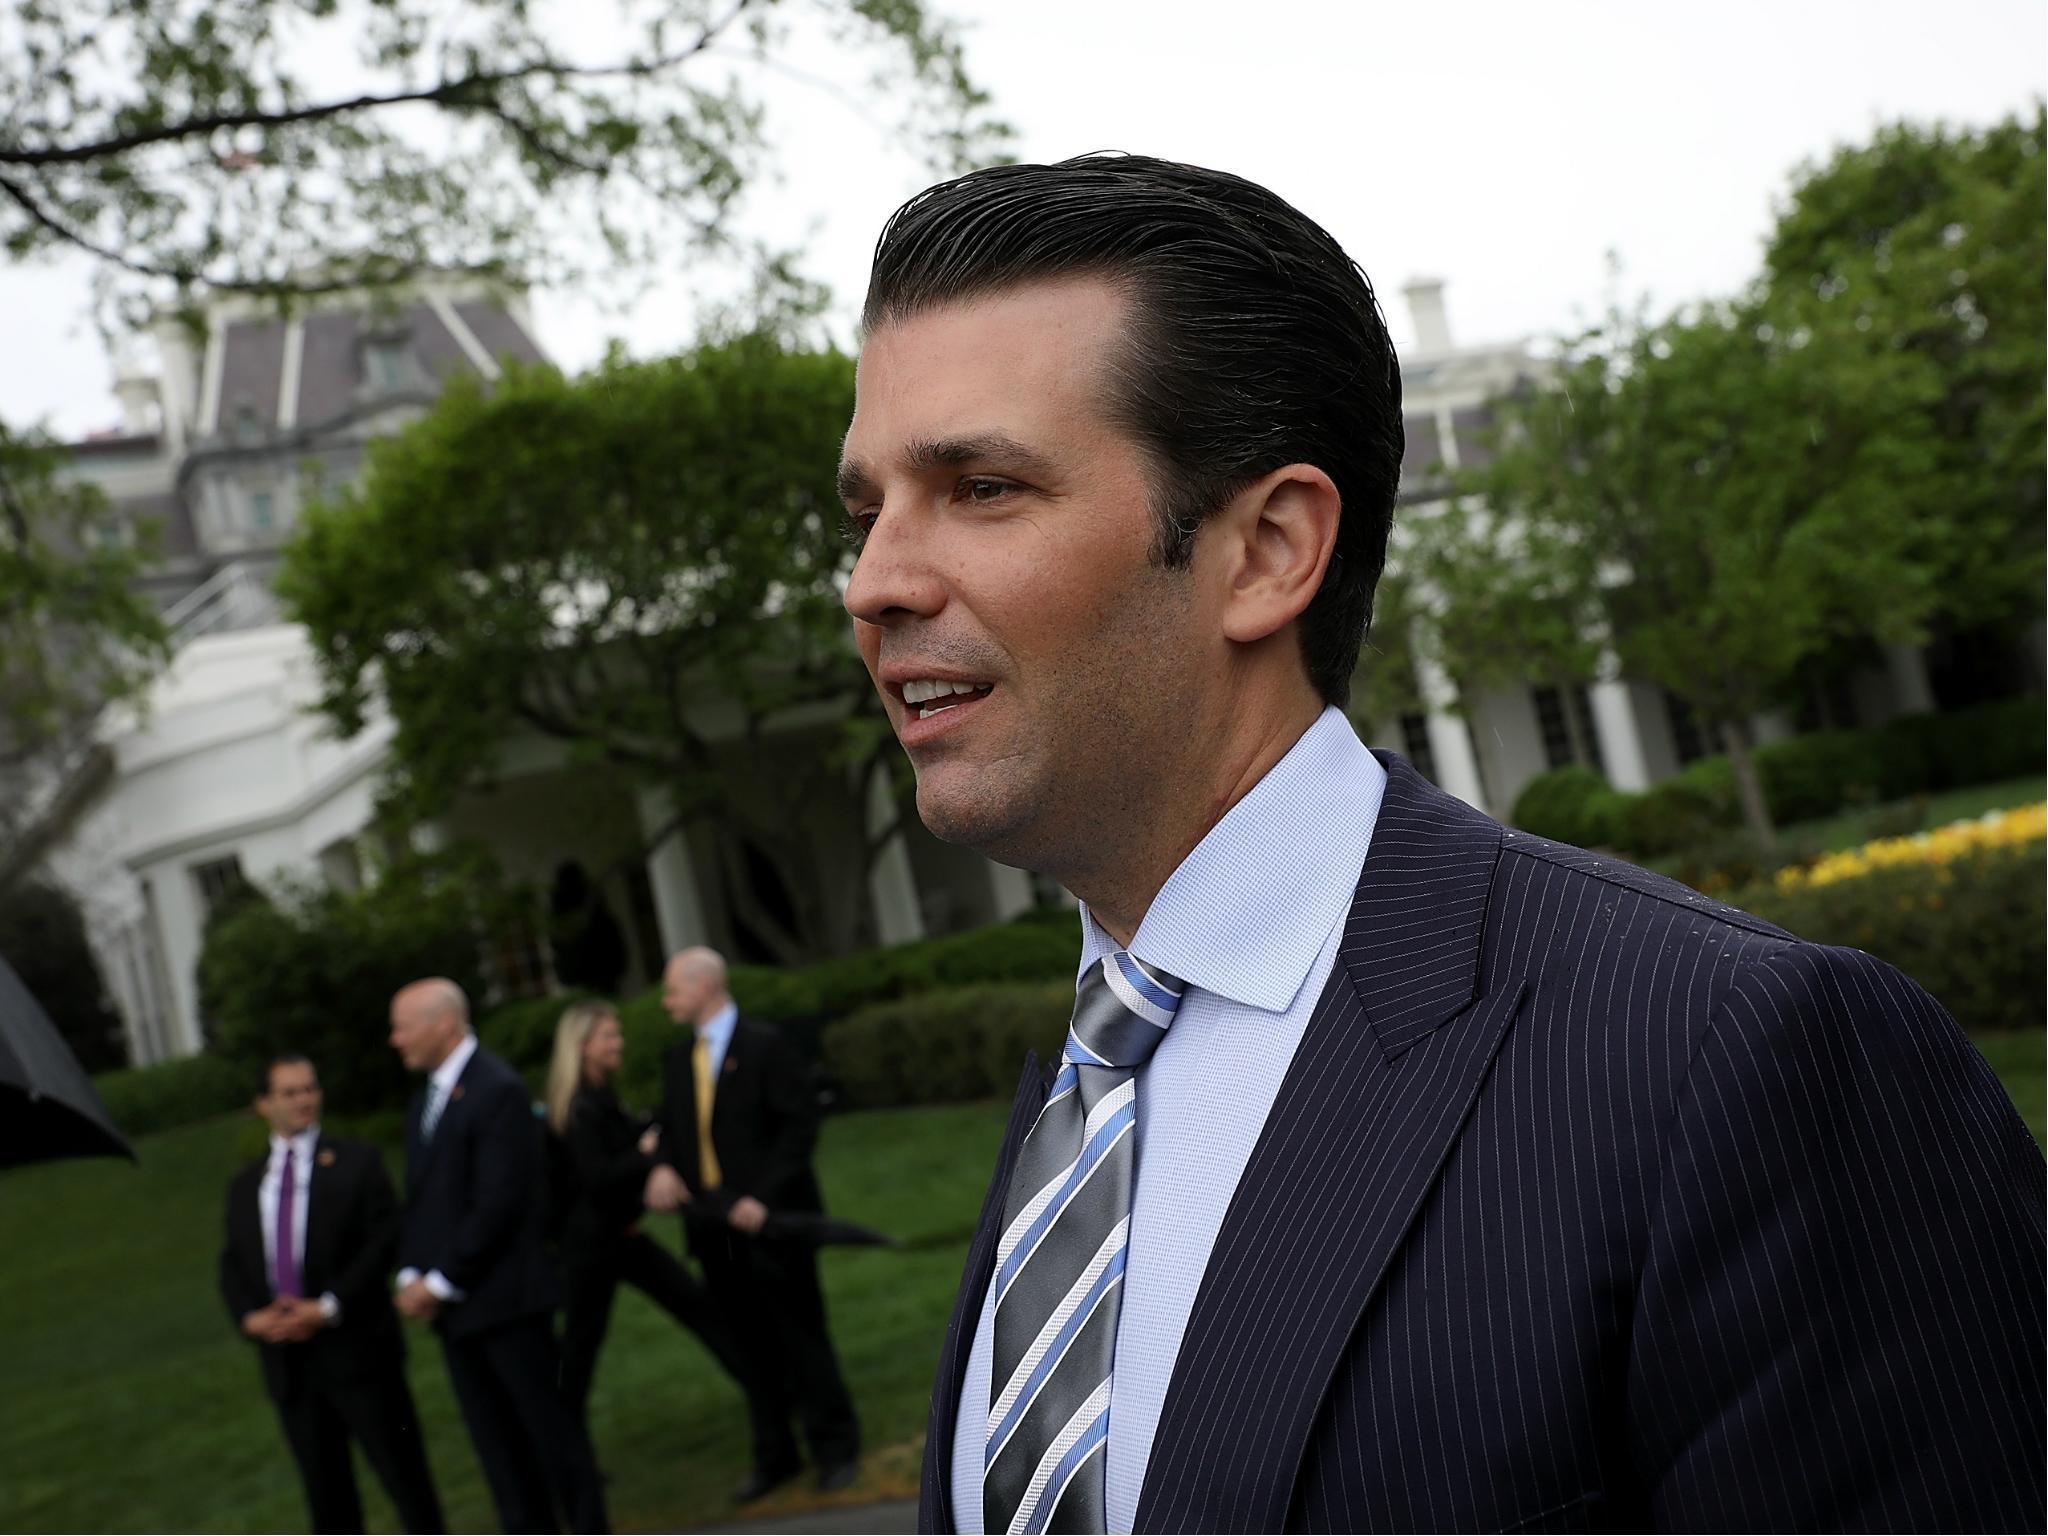 Mr Trump Jr has taken over control of the Trump Organisation while his father is president